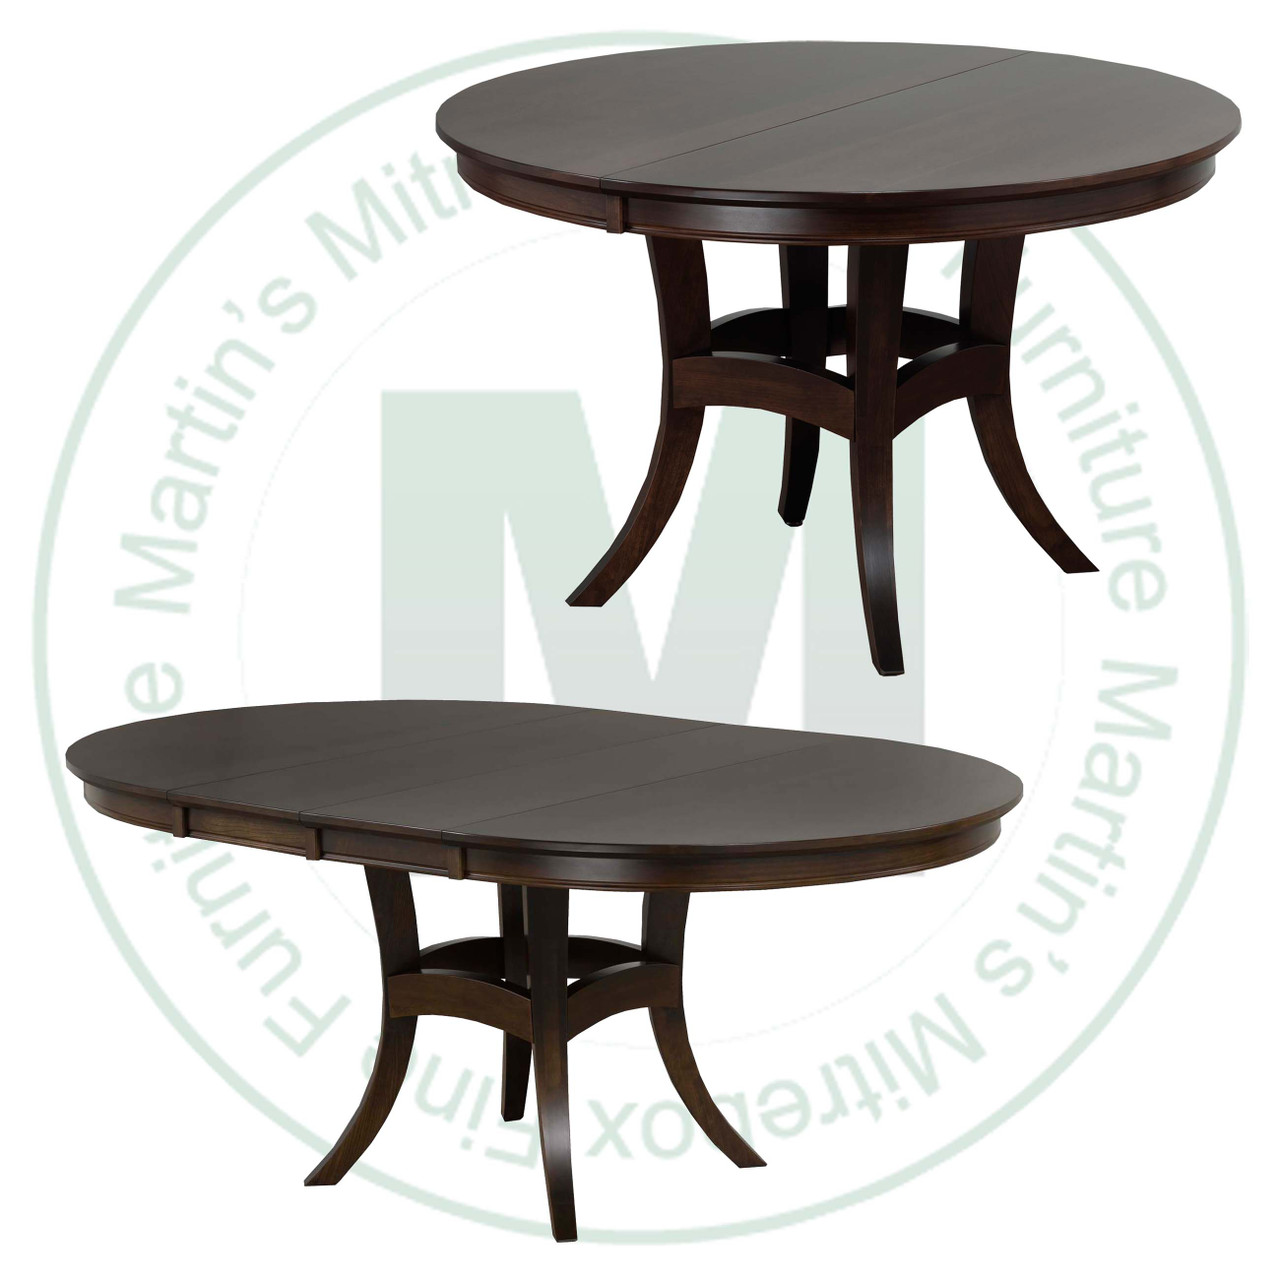 Maple Beijing Single Pedestal Table 42''D x 42''W x 30''H With 2 - 12'' Leaves